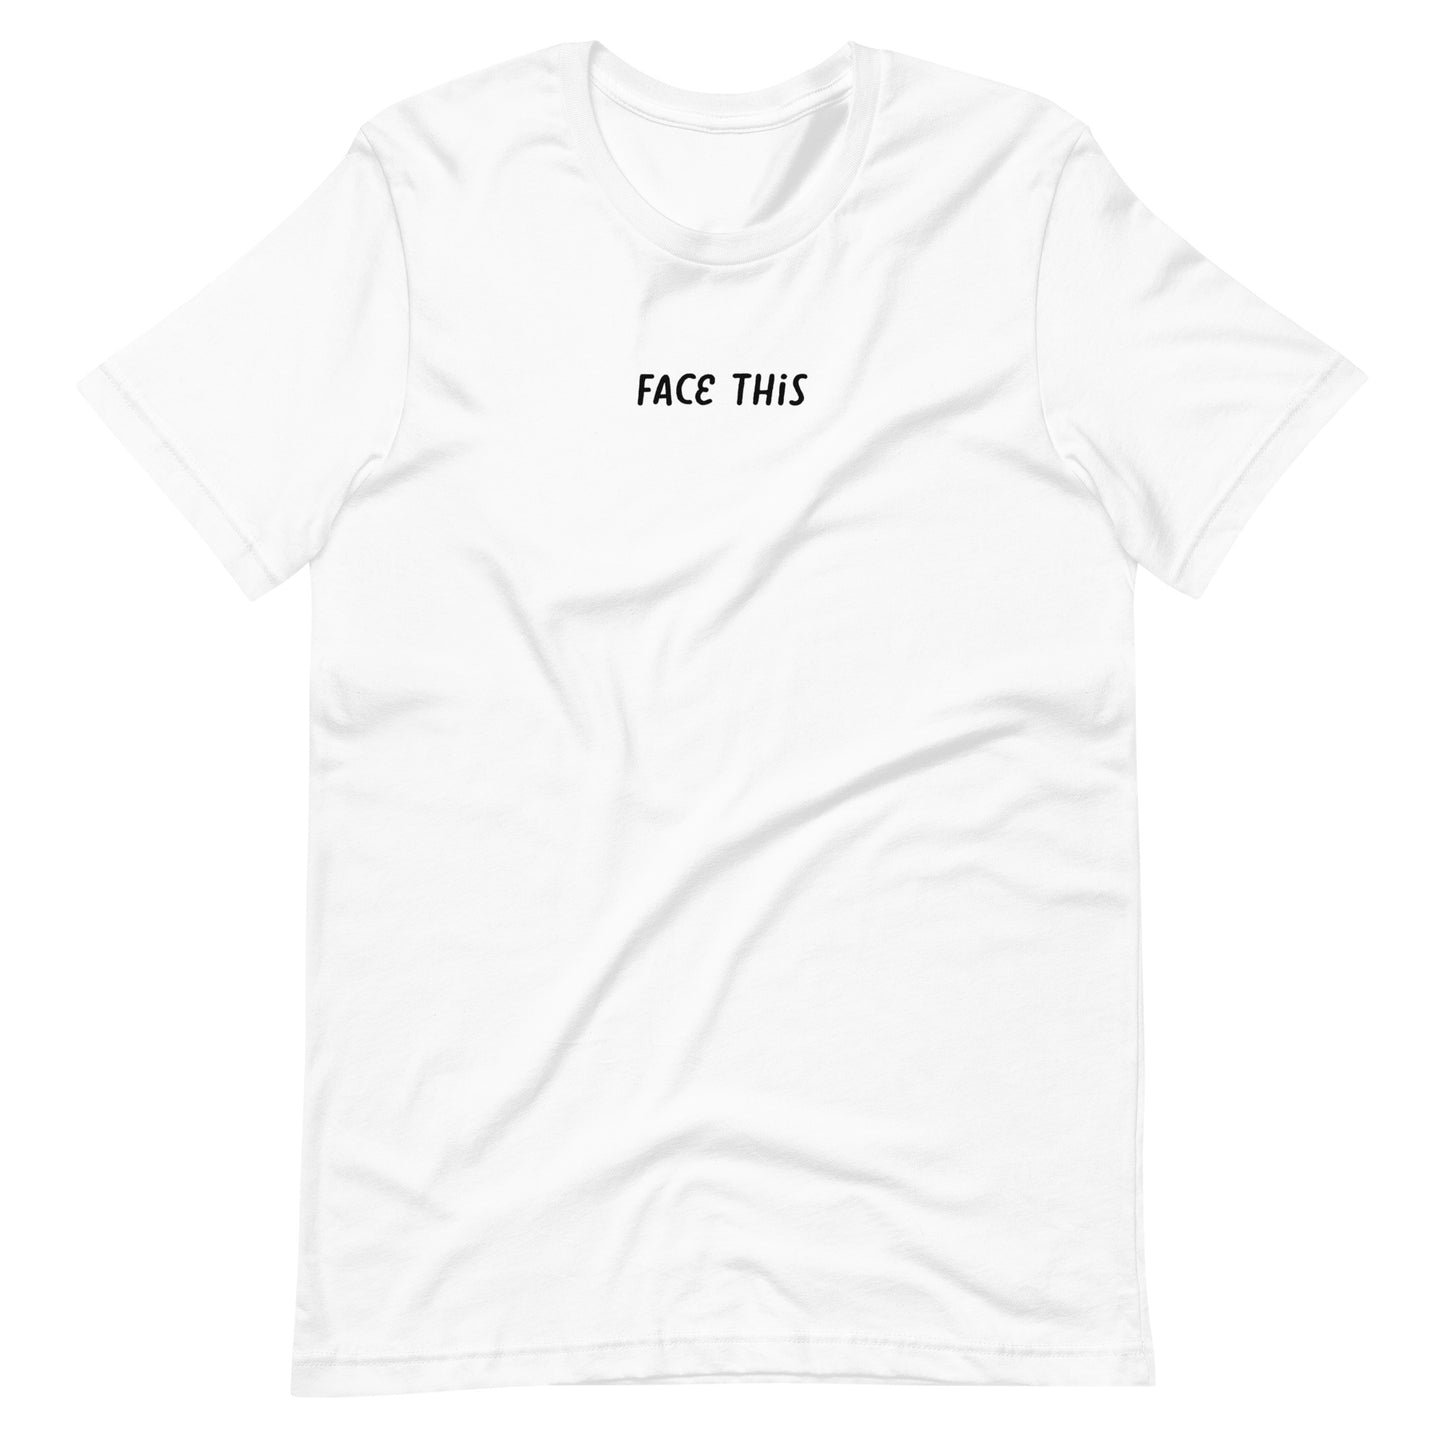 Maggie Stephenson x Face This T-shirt